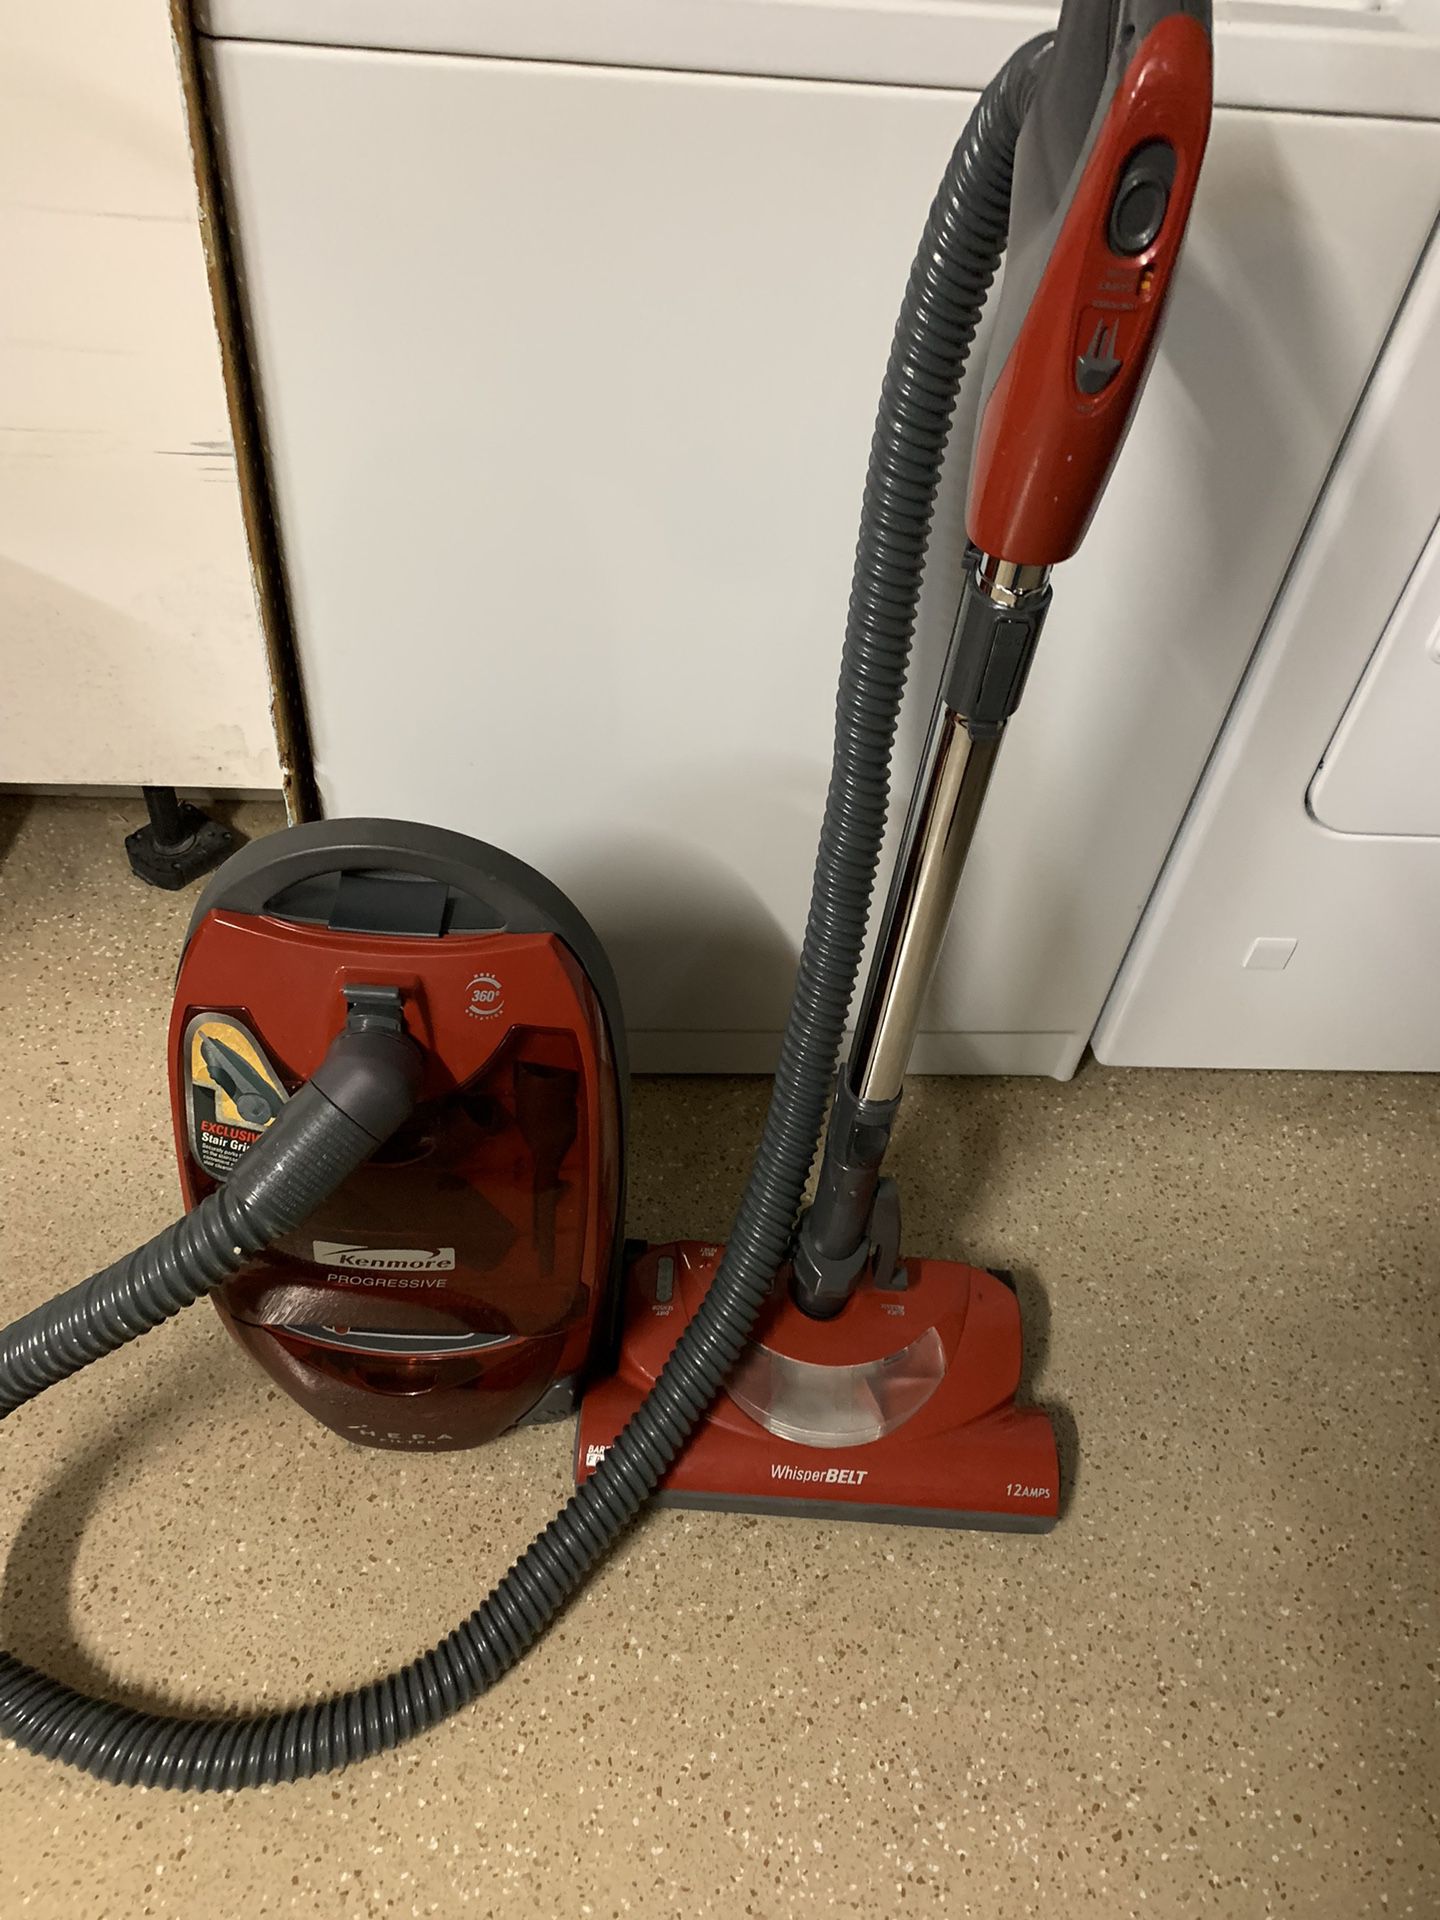 Kenmore Progessive Canister Vacuum  Works Great!